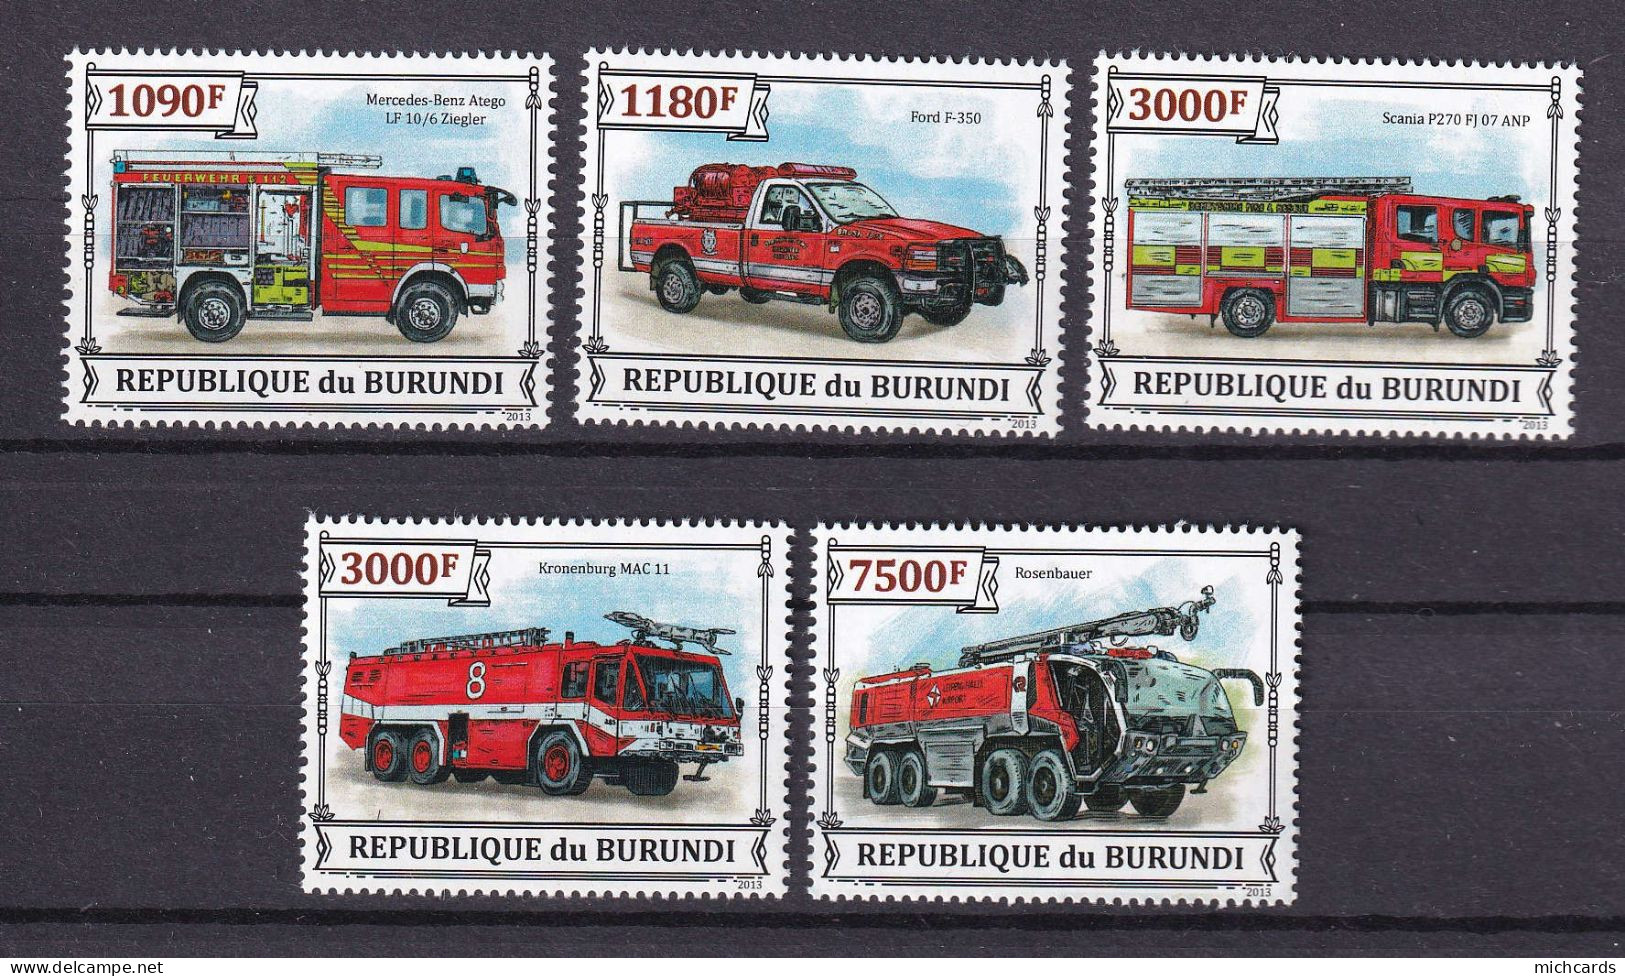 172 BURUNDI 2013 - Y&T 2130/33 Du BF 372 - Vehicule Pompiers Camion - Neuf ** (MNH) Sans Charniere - Unused Stamps